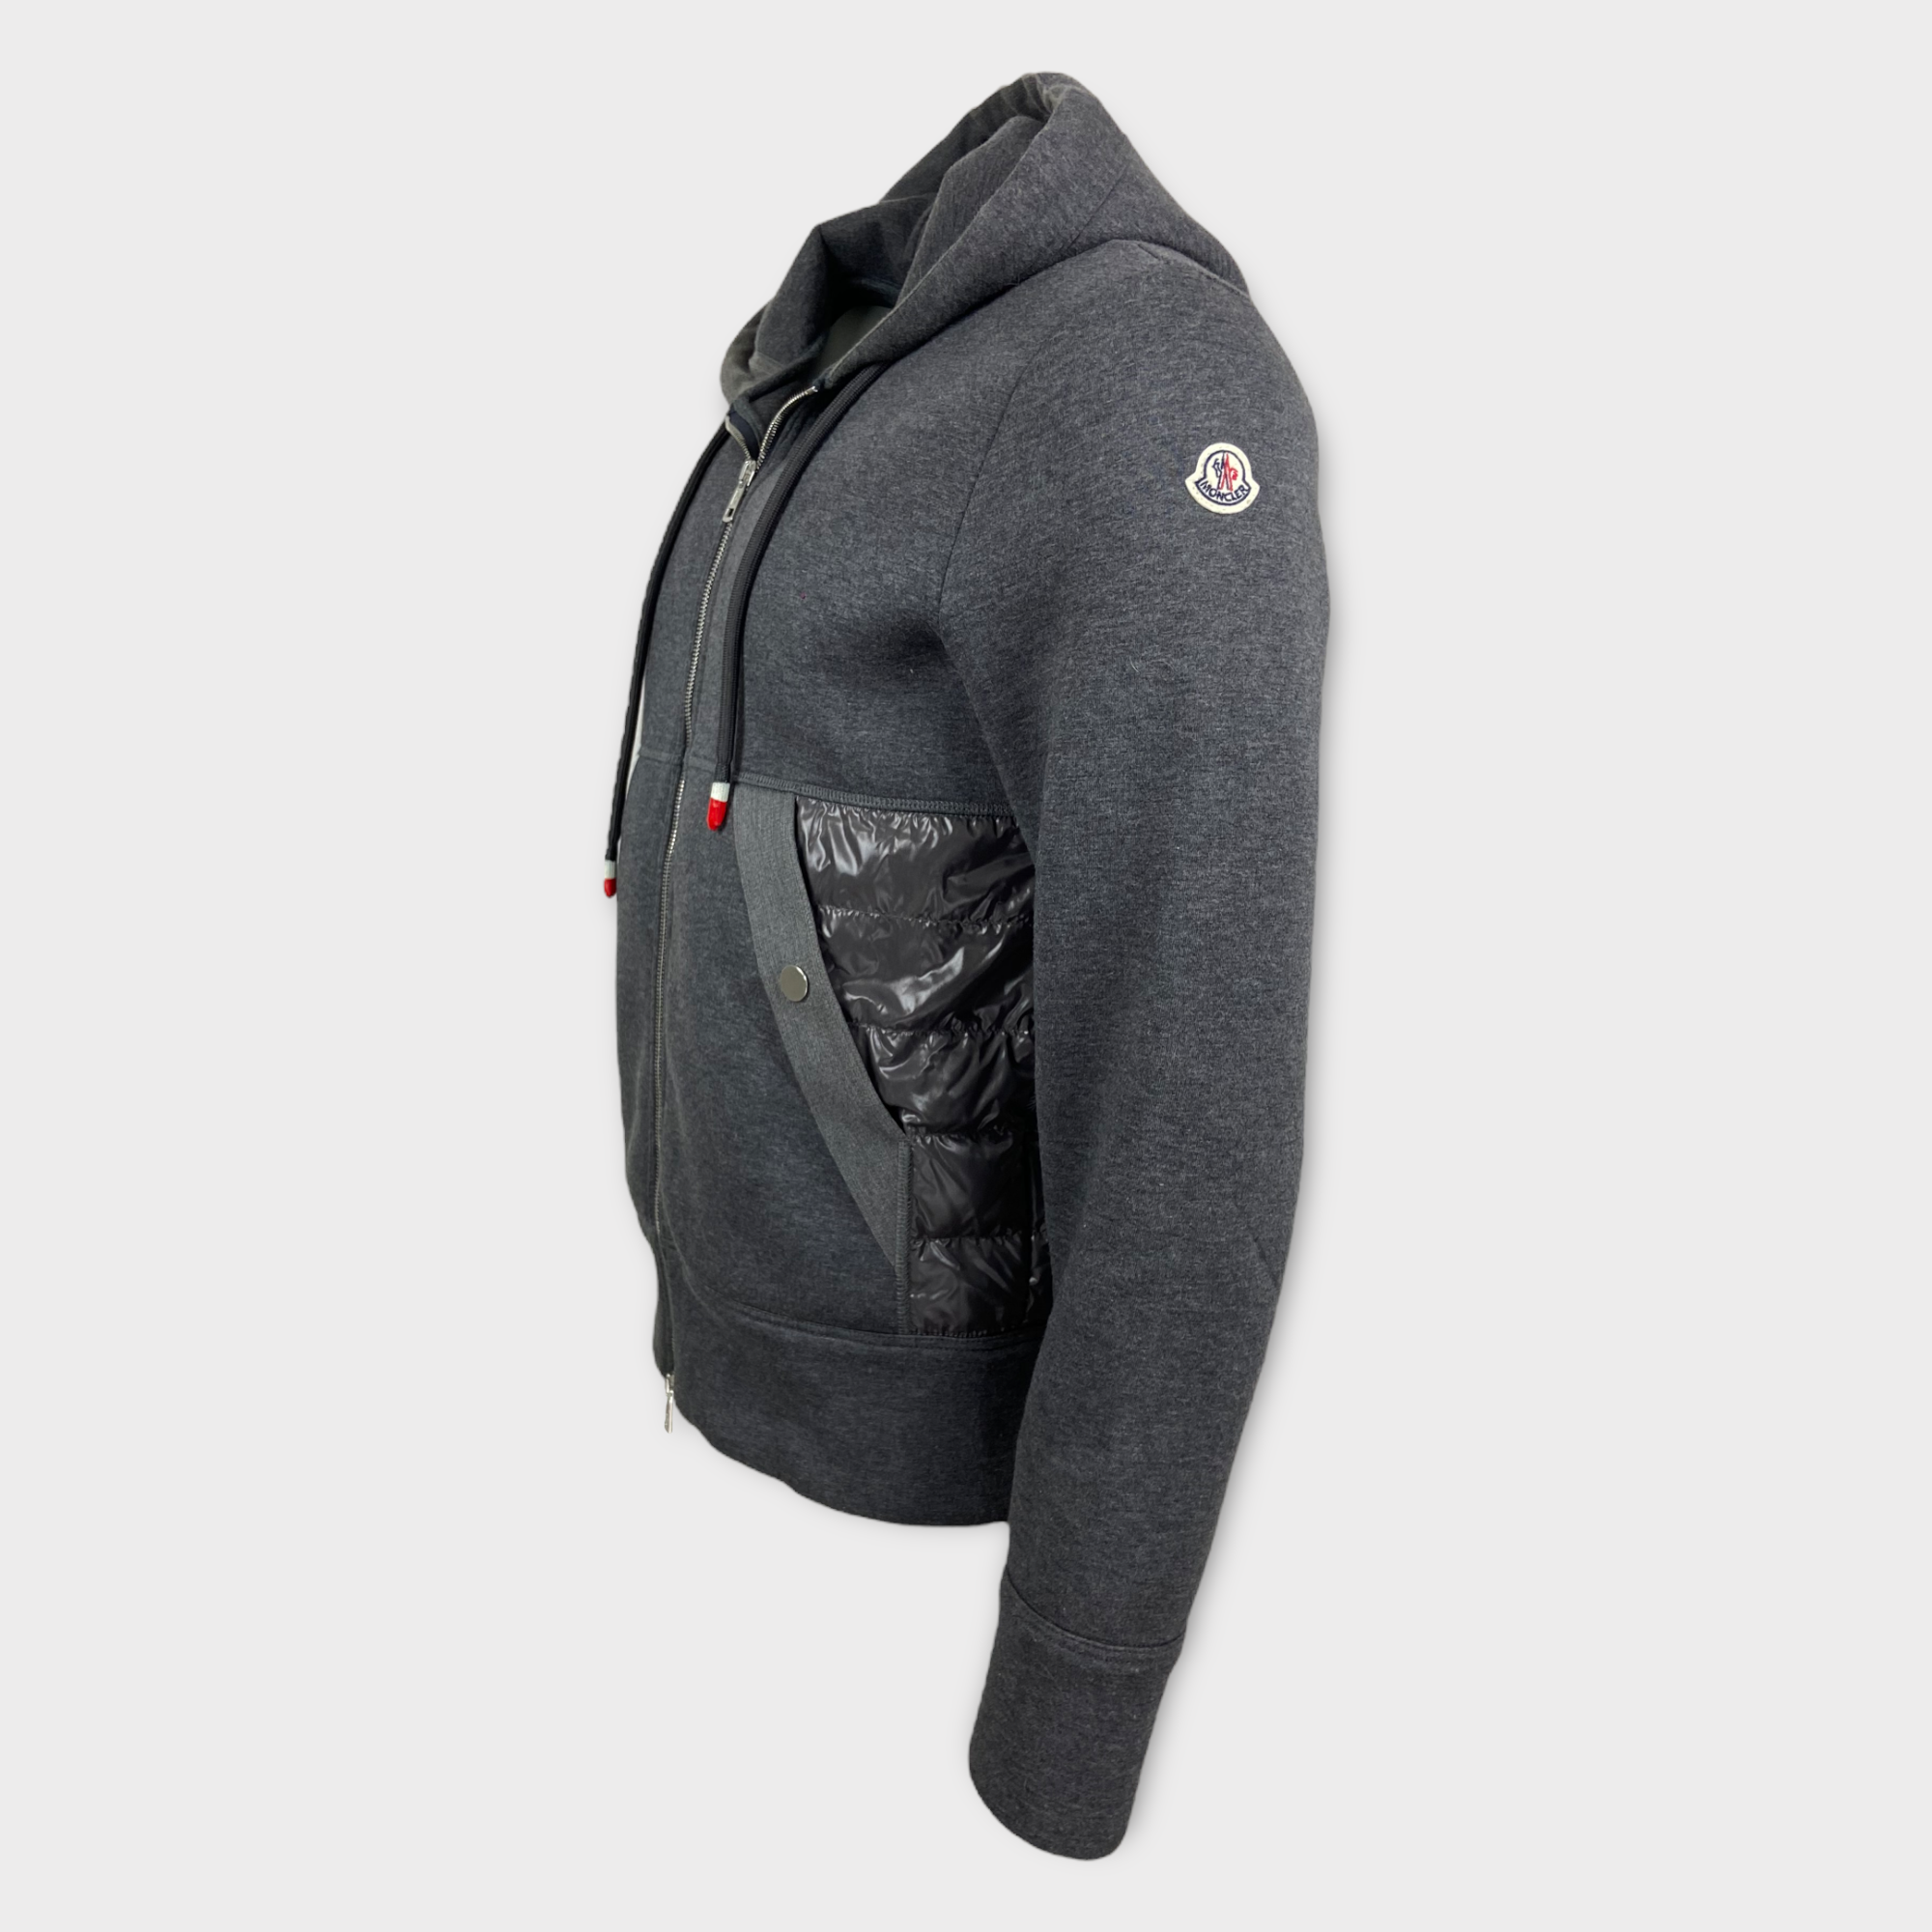 Moncler Hooded Down Cardigan - Size M (Fits S/M)